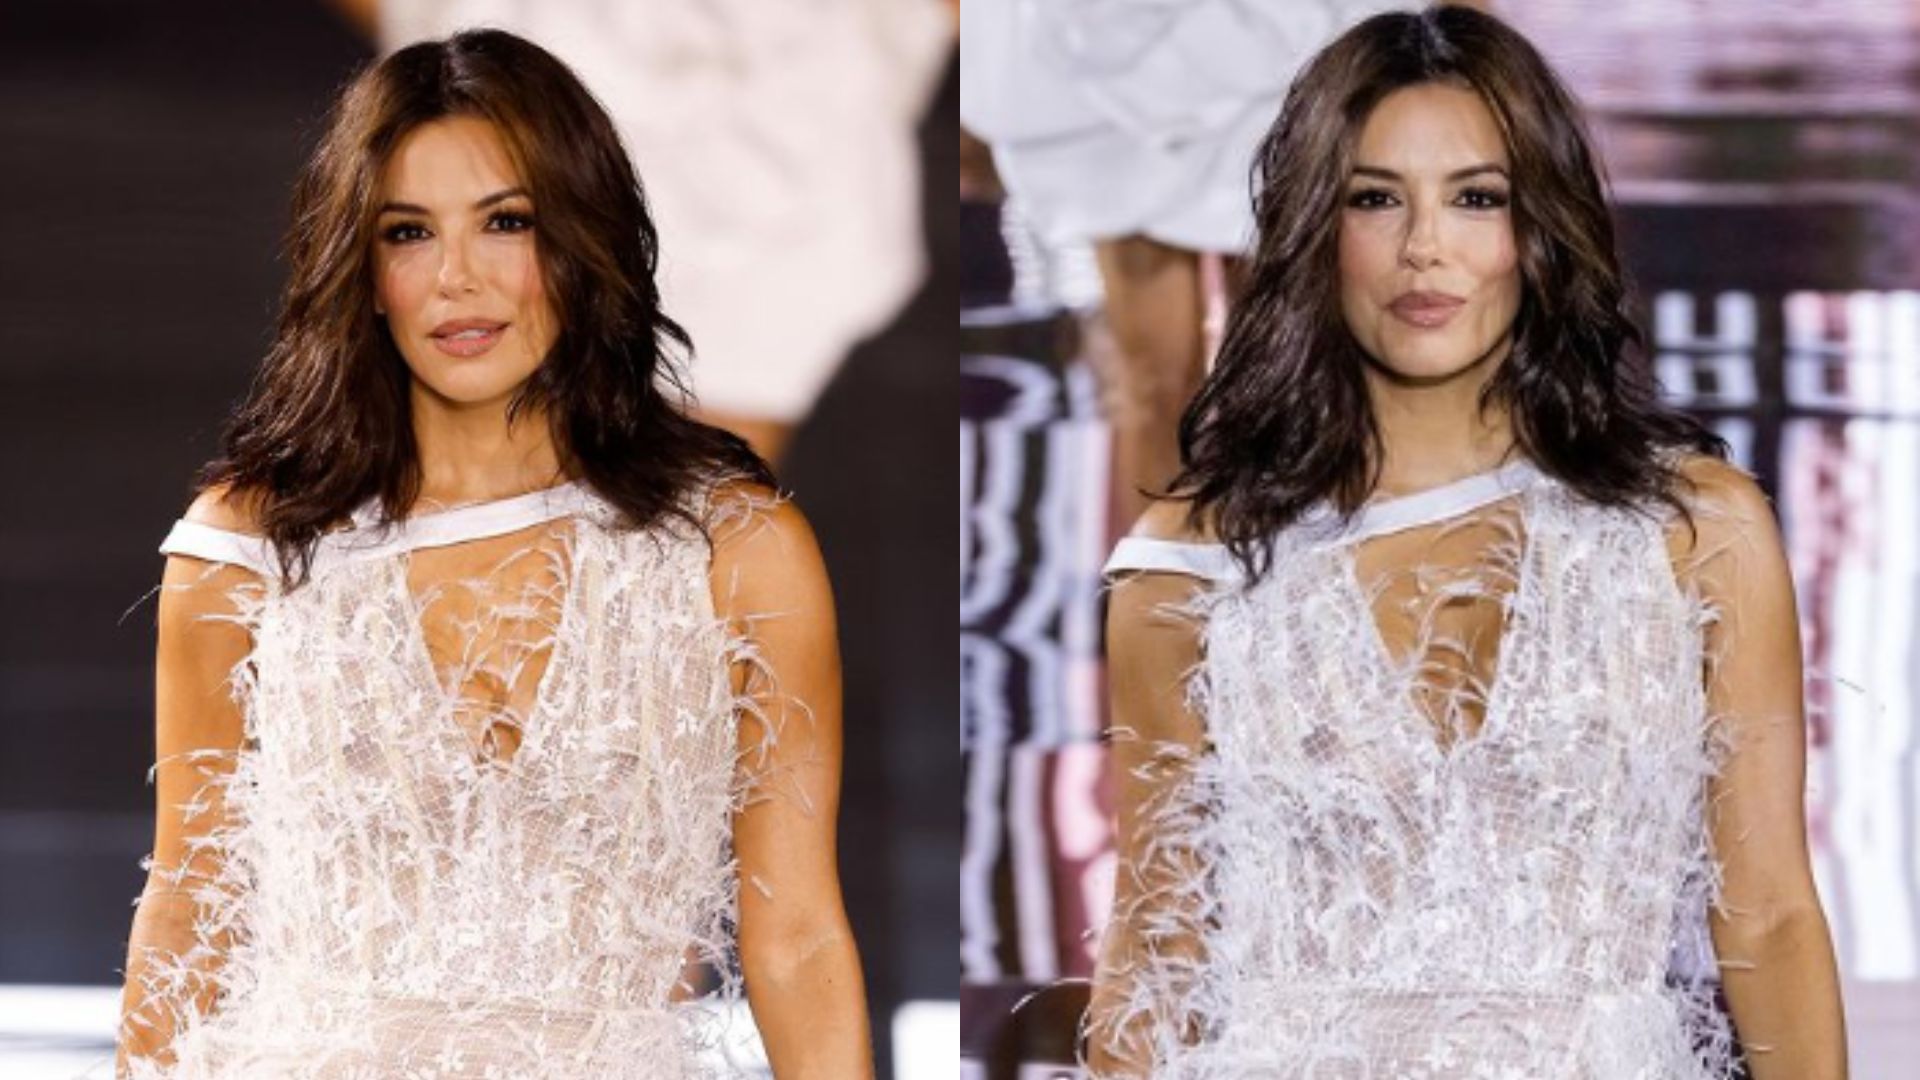 Know About Eva Longoria's Husband And Her Crystal Dress Video